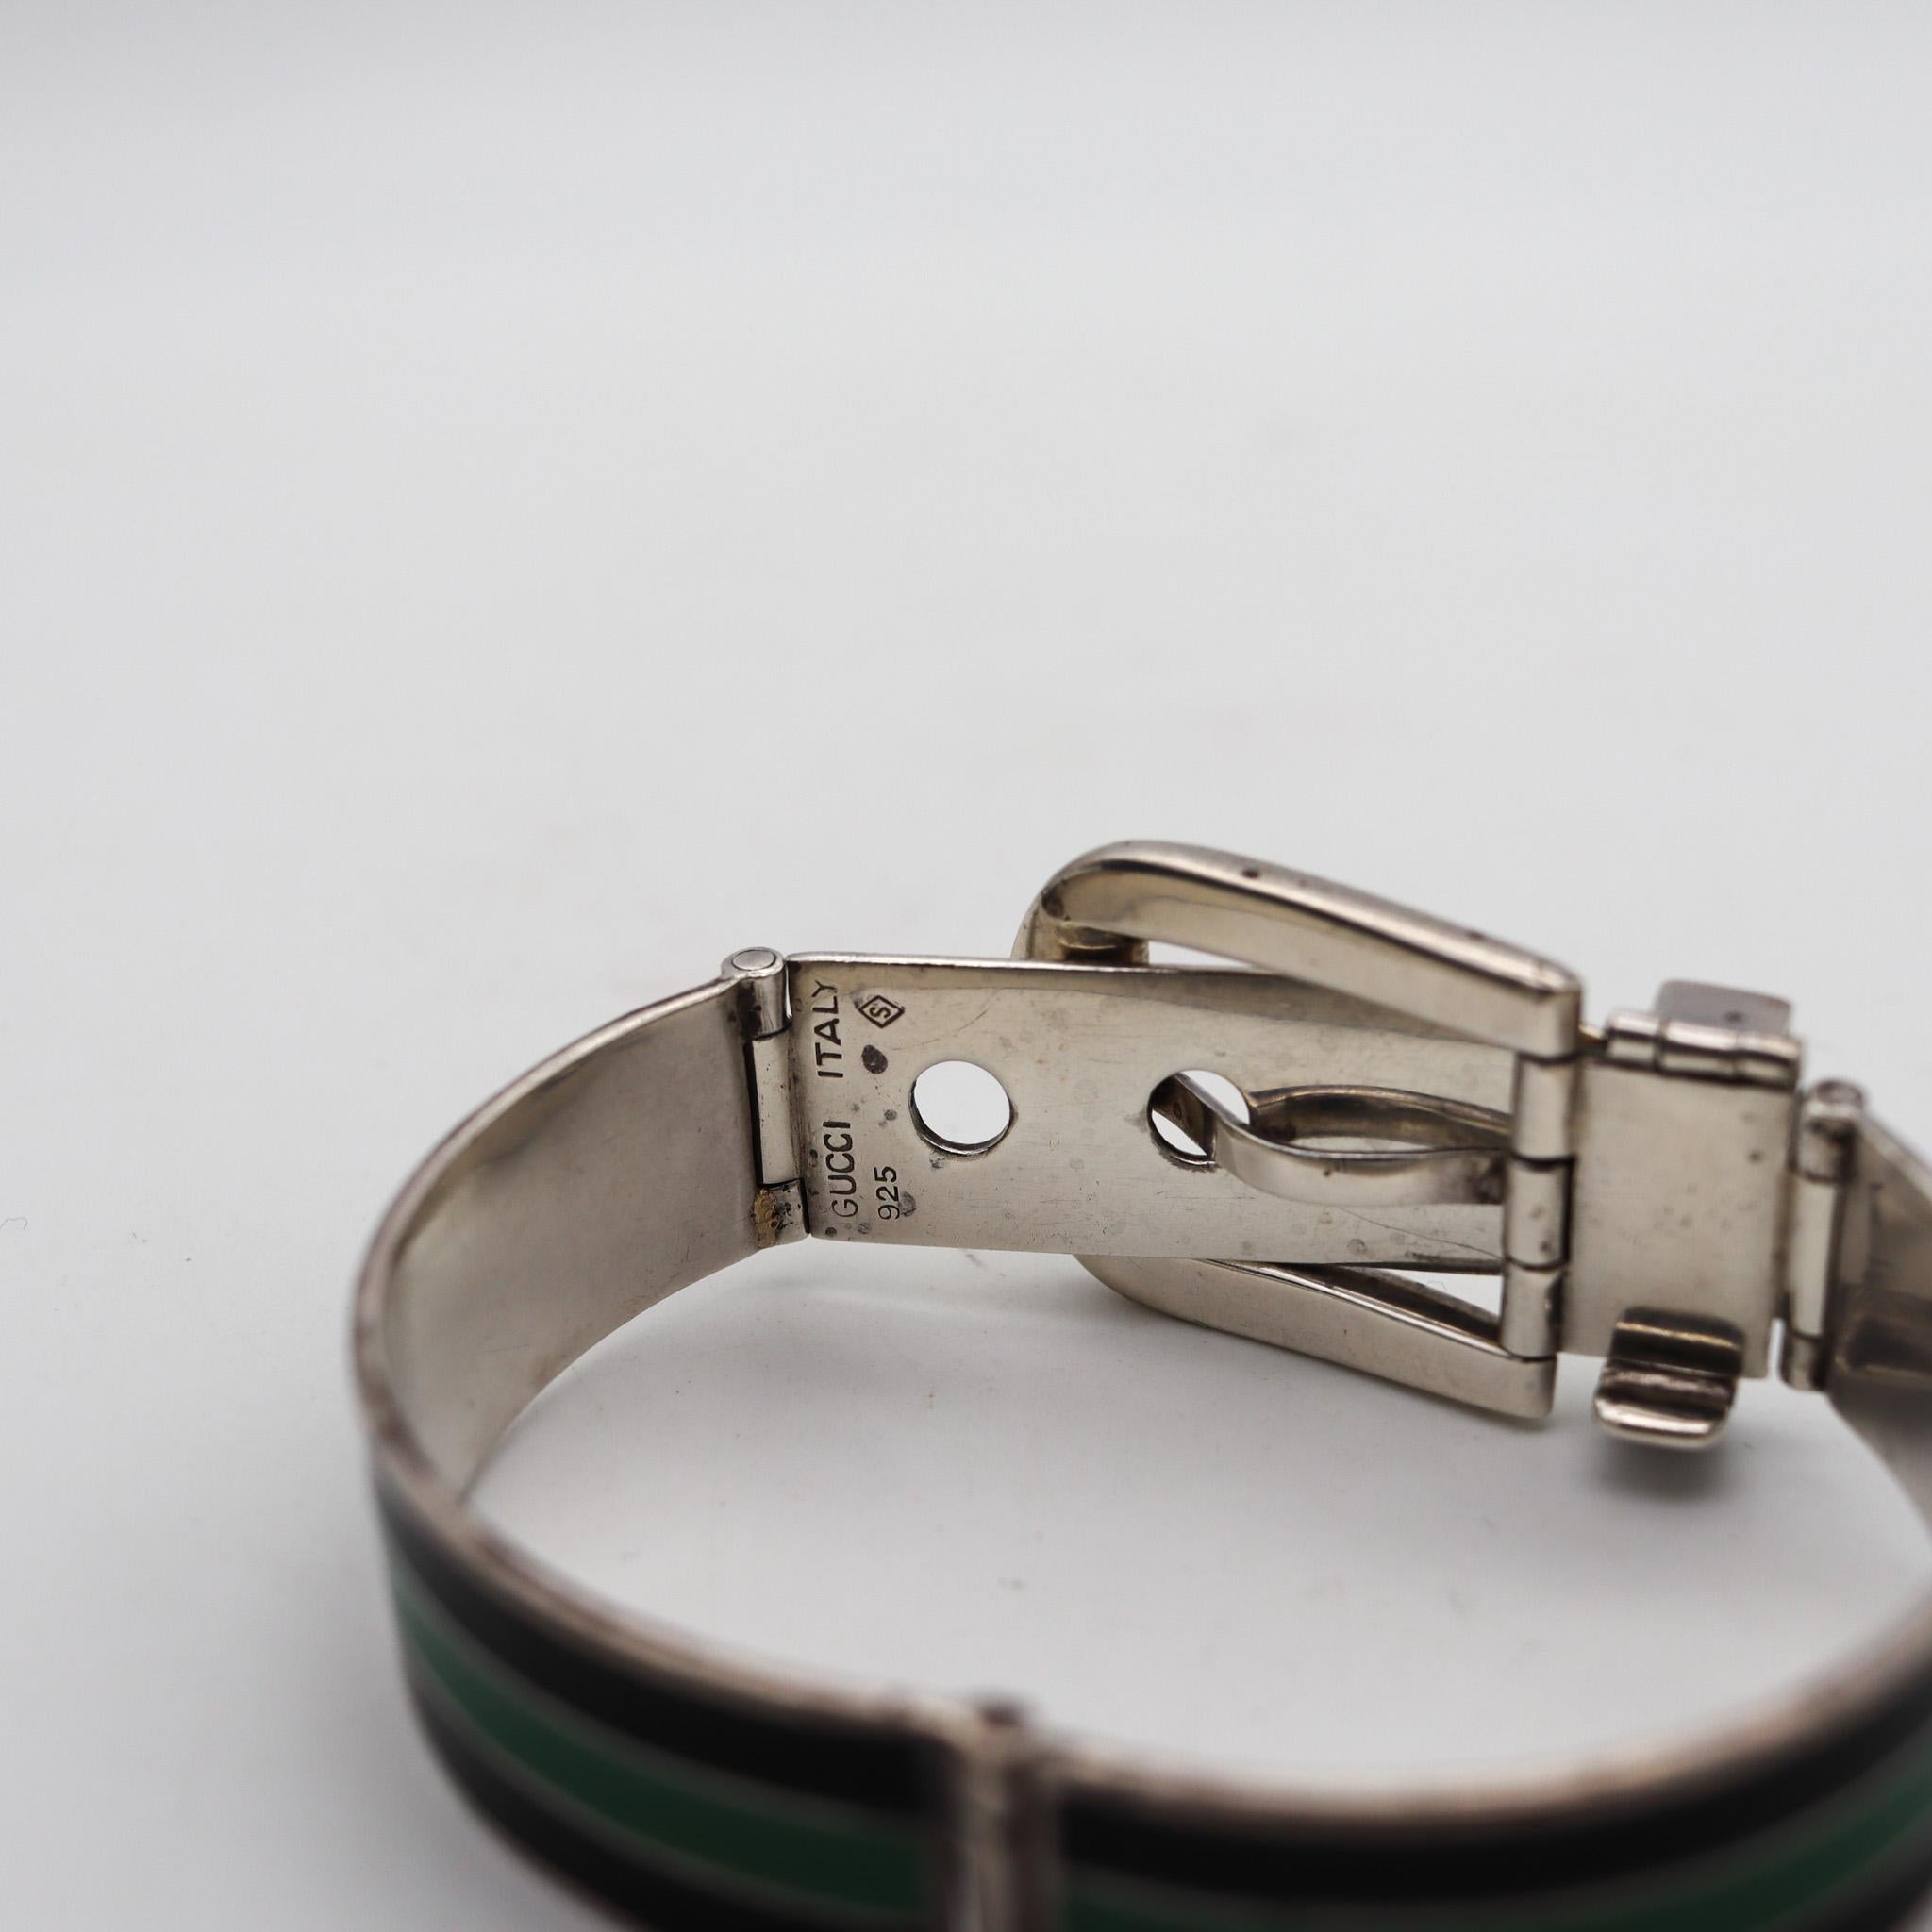 Gucci 1970 Buckle Bracelet In .925 Sterling Silver With Green And Black Enamel In Excellent Condition For Sale In Miami, FL